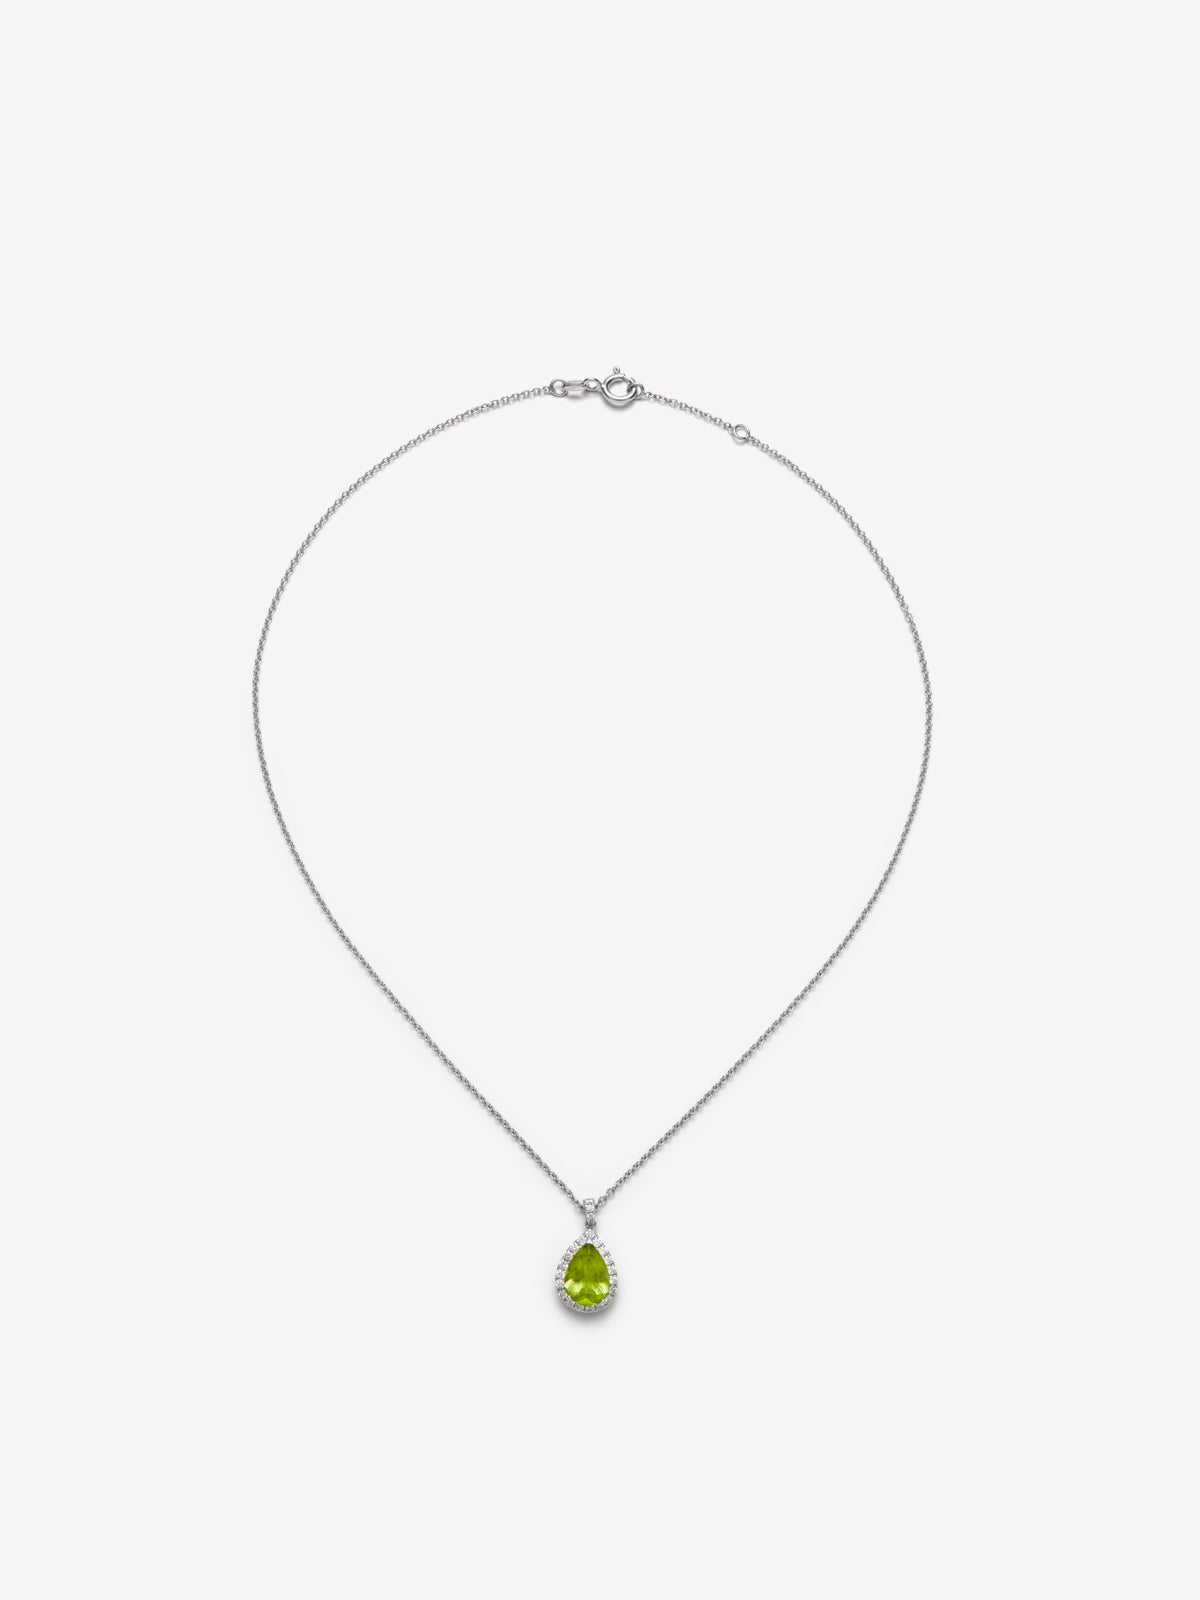 18K white gold pendant with pear-cut green peridot of 2.58 cts and brilliant-cut diamonds of 0.36 cts